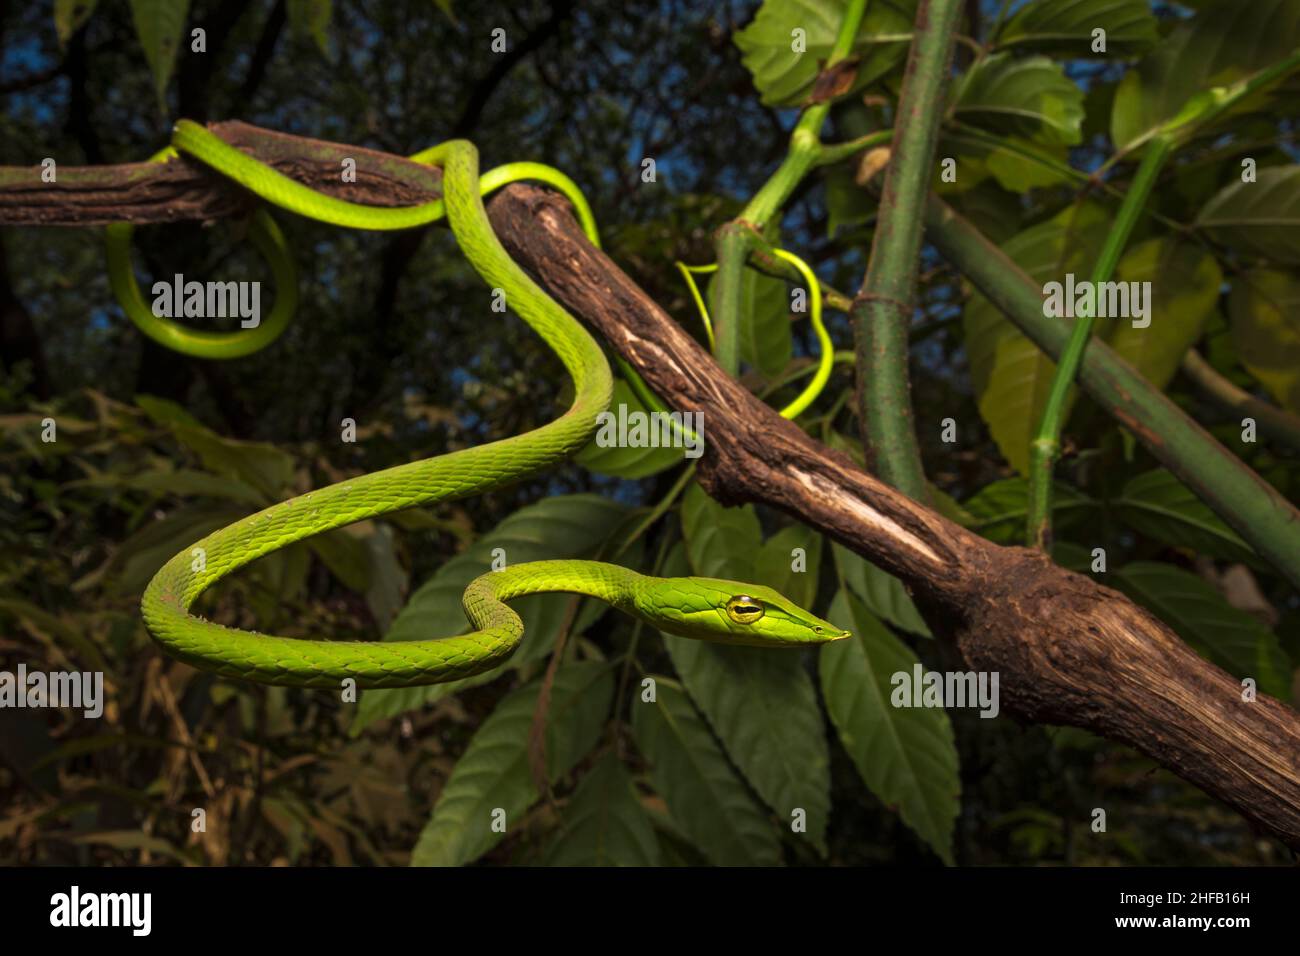 A wide angle portrait of a common wine snake in typical habitat Stock Photo